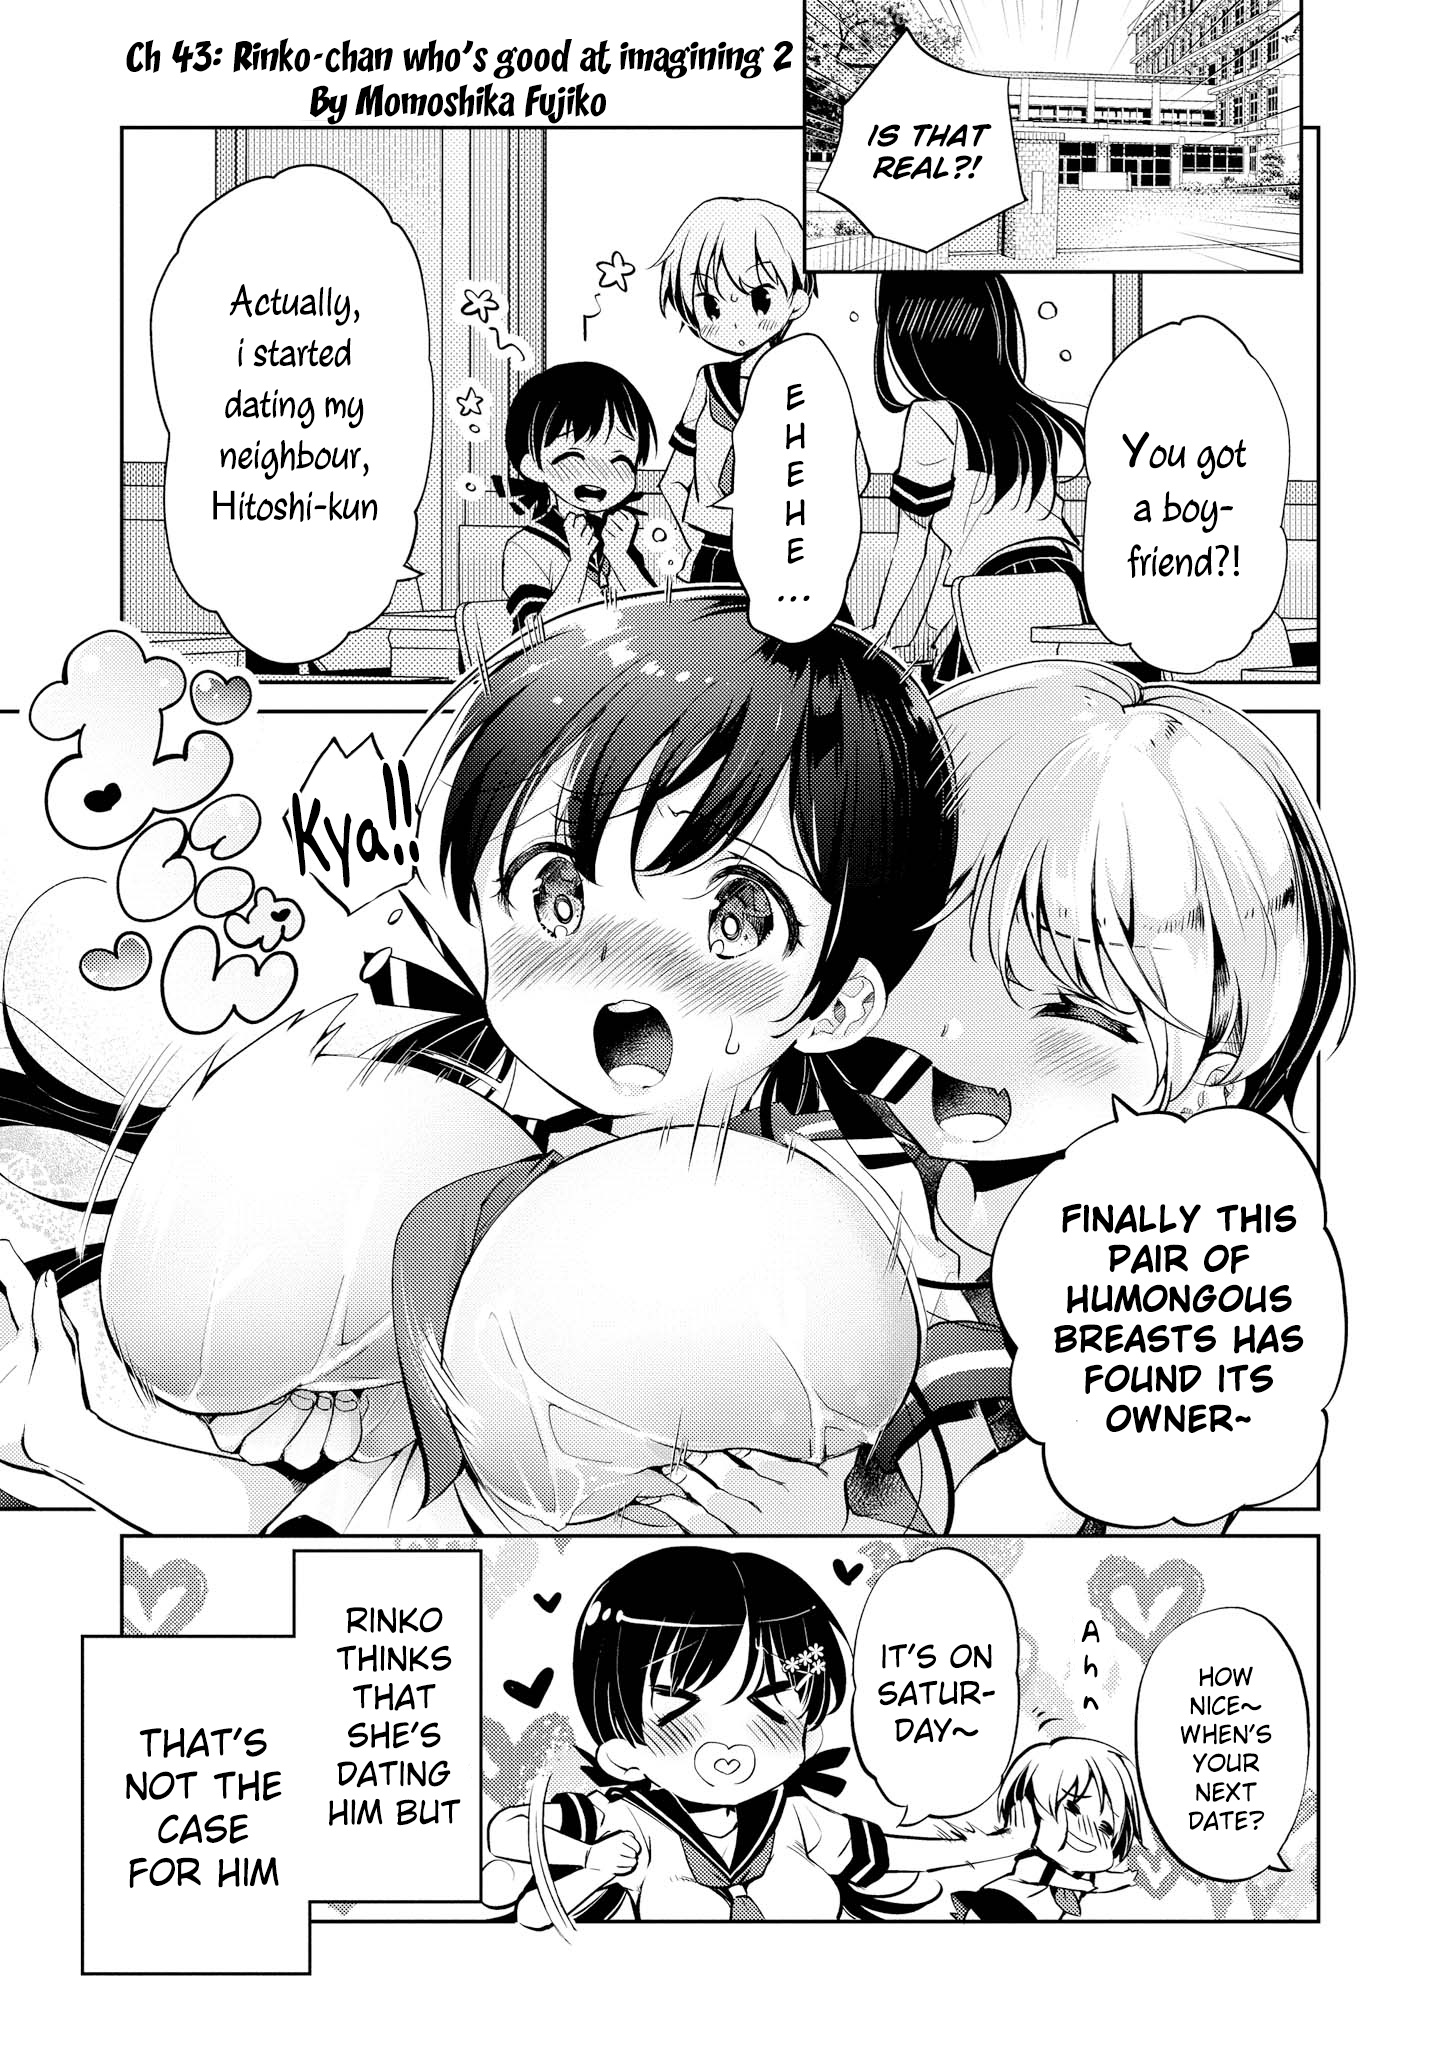 Do You Like Fluffy Boobs? Busty Girl Anthology Comic Vol.6 Chapter 43: Rinko-Chan Who's Good At Imagining 2 - Picture 2